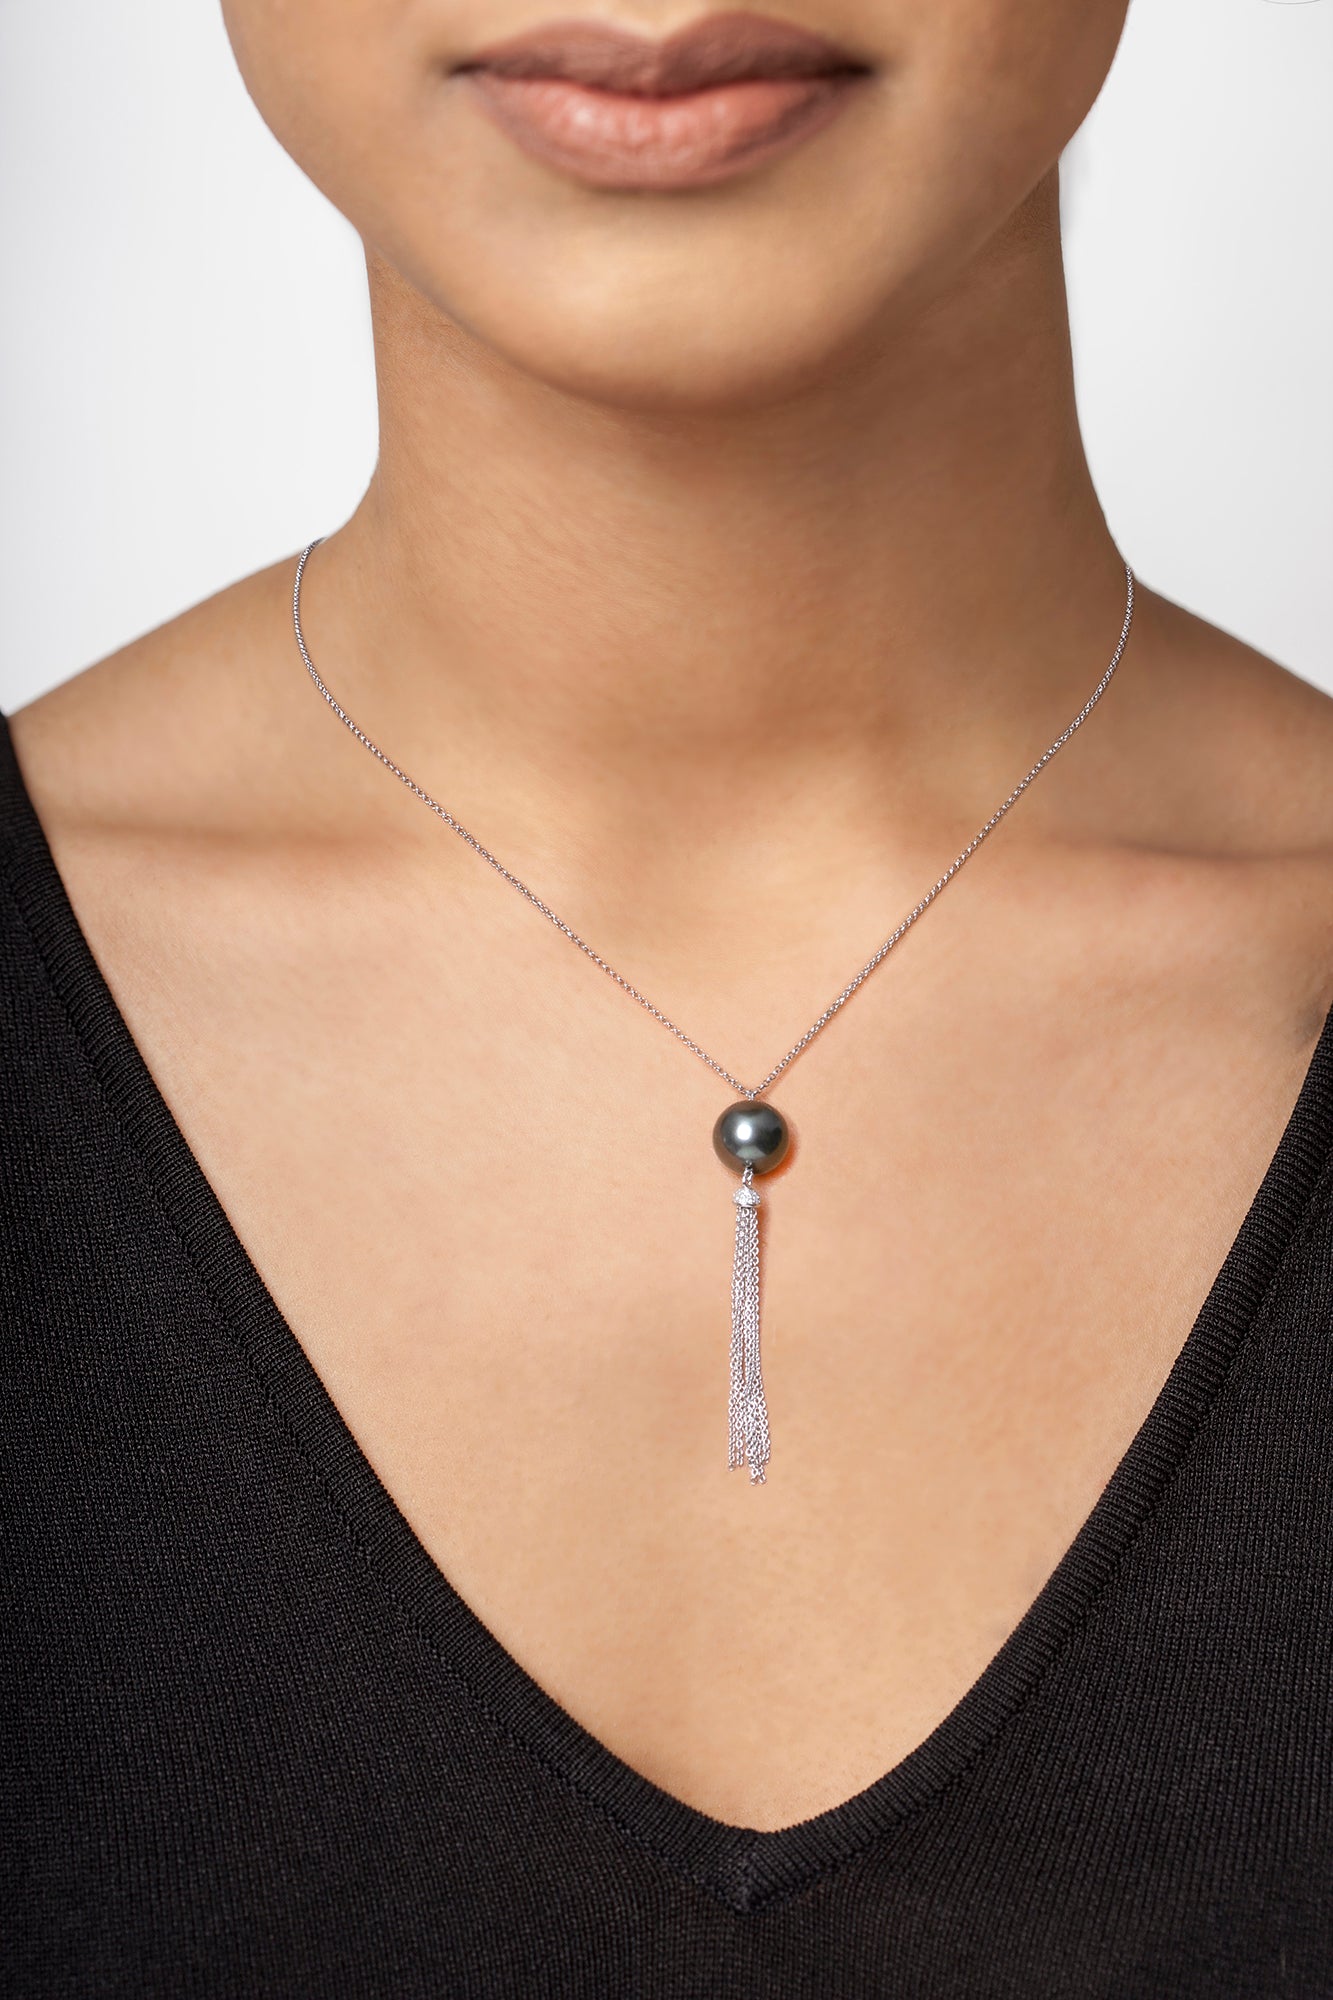 The Tahitian Tassel Necklace